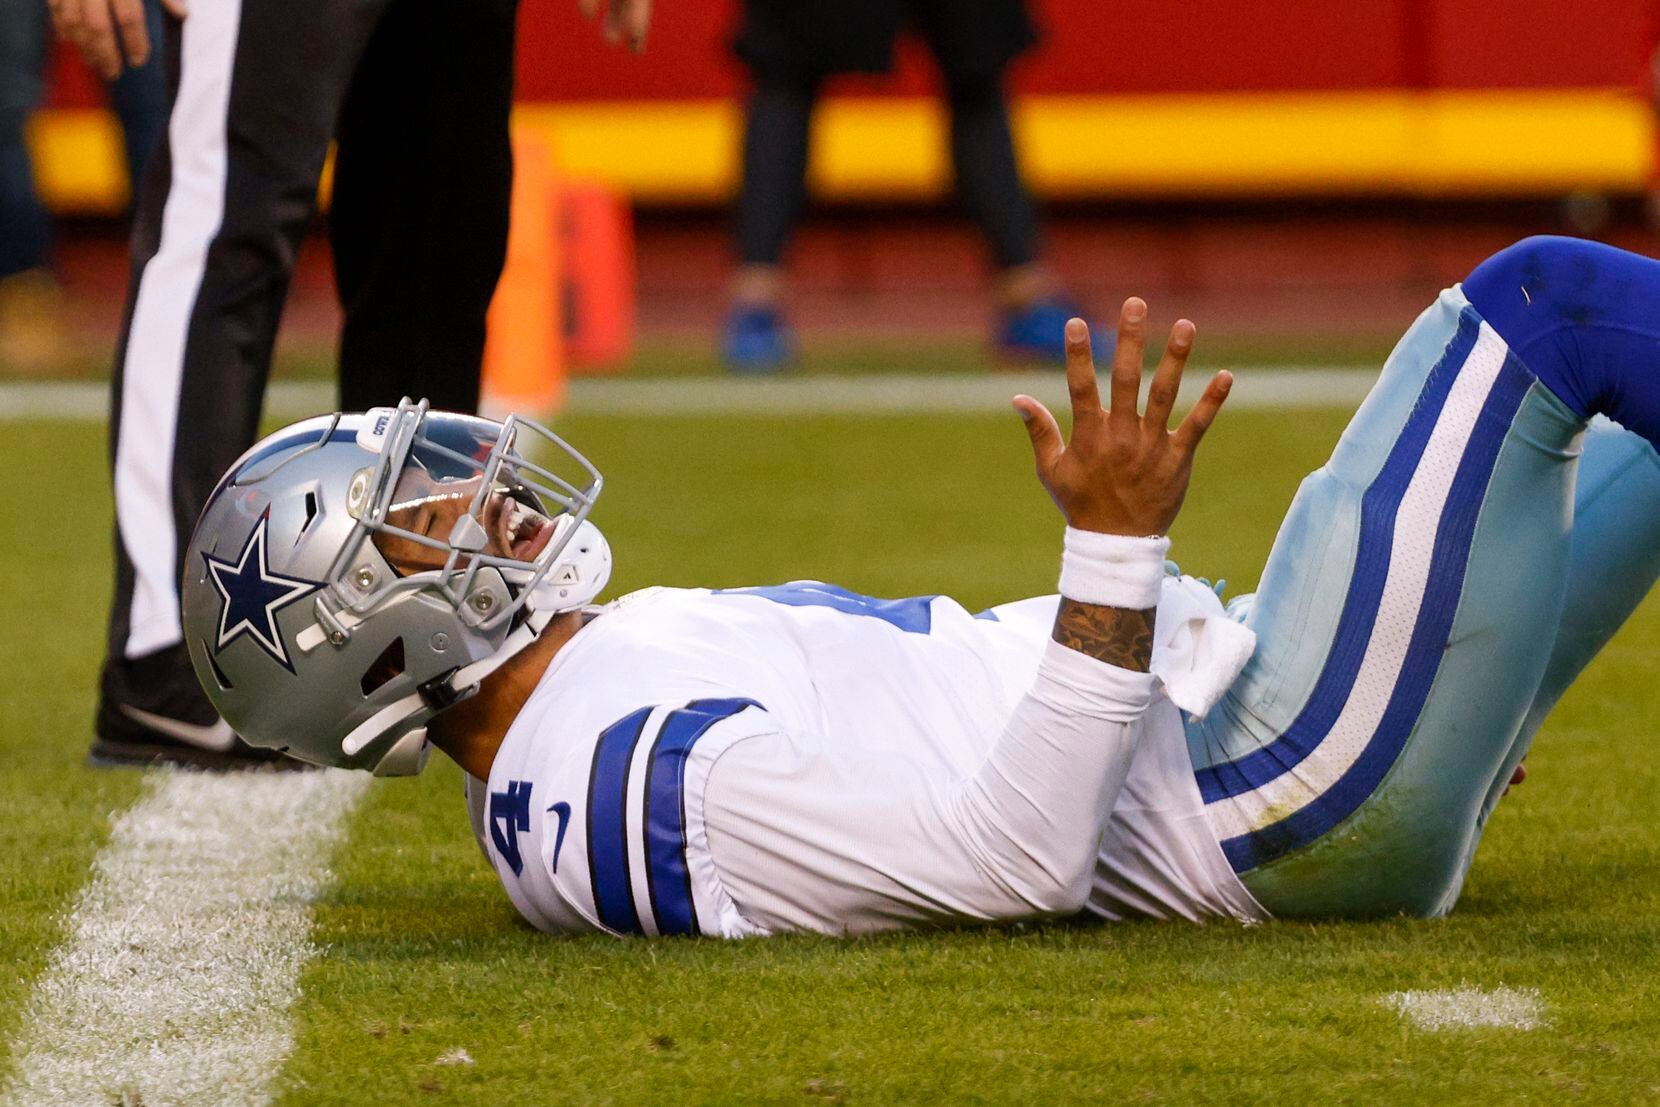 Dallas Cowboys quarterback Dak Prescott (4) reacts after being knocked to the ground by Kansas City Chiefs outside linebacker Nick Bolton (54) during the first half of an NFL football game against the Kansas City Chiefs at Arrowhead Stadium on Sunday, Nov. 21, 2021, in Kansas City, Missouri. (Elias Valverde II/The Dallas Morning News)